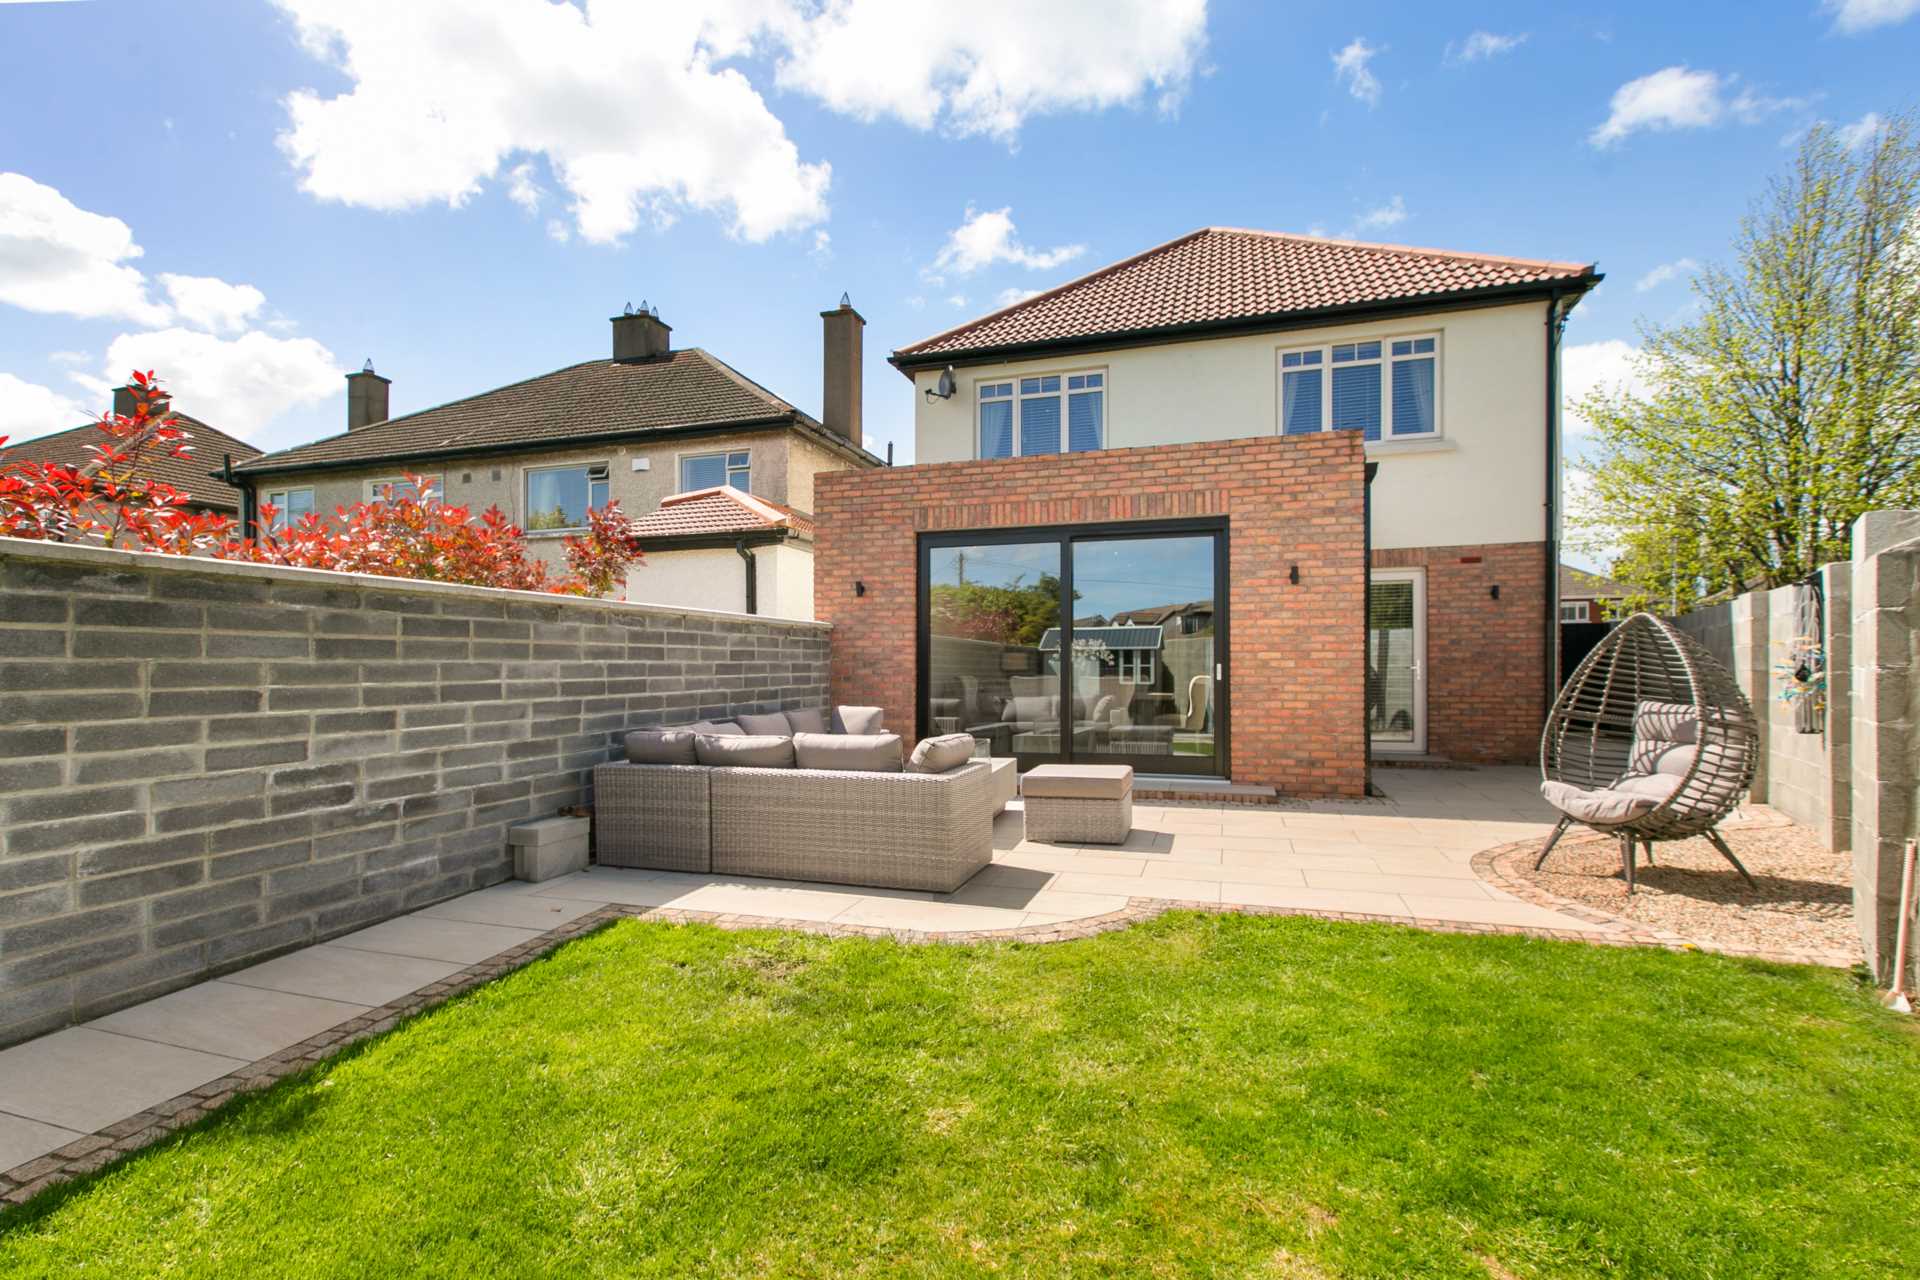 30A Cypress Grove Road, Templeogue, D6W PC90, Image 21